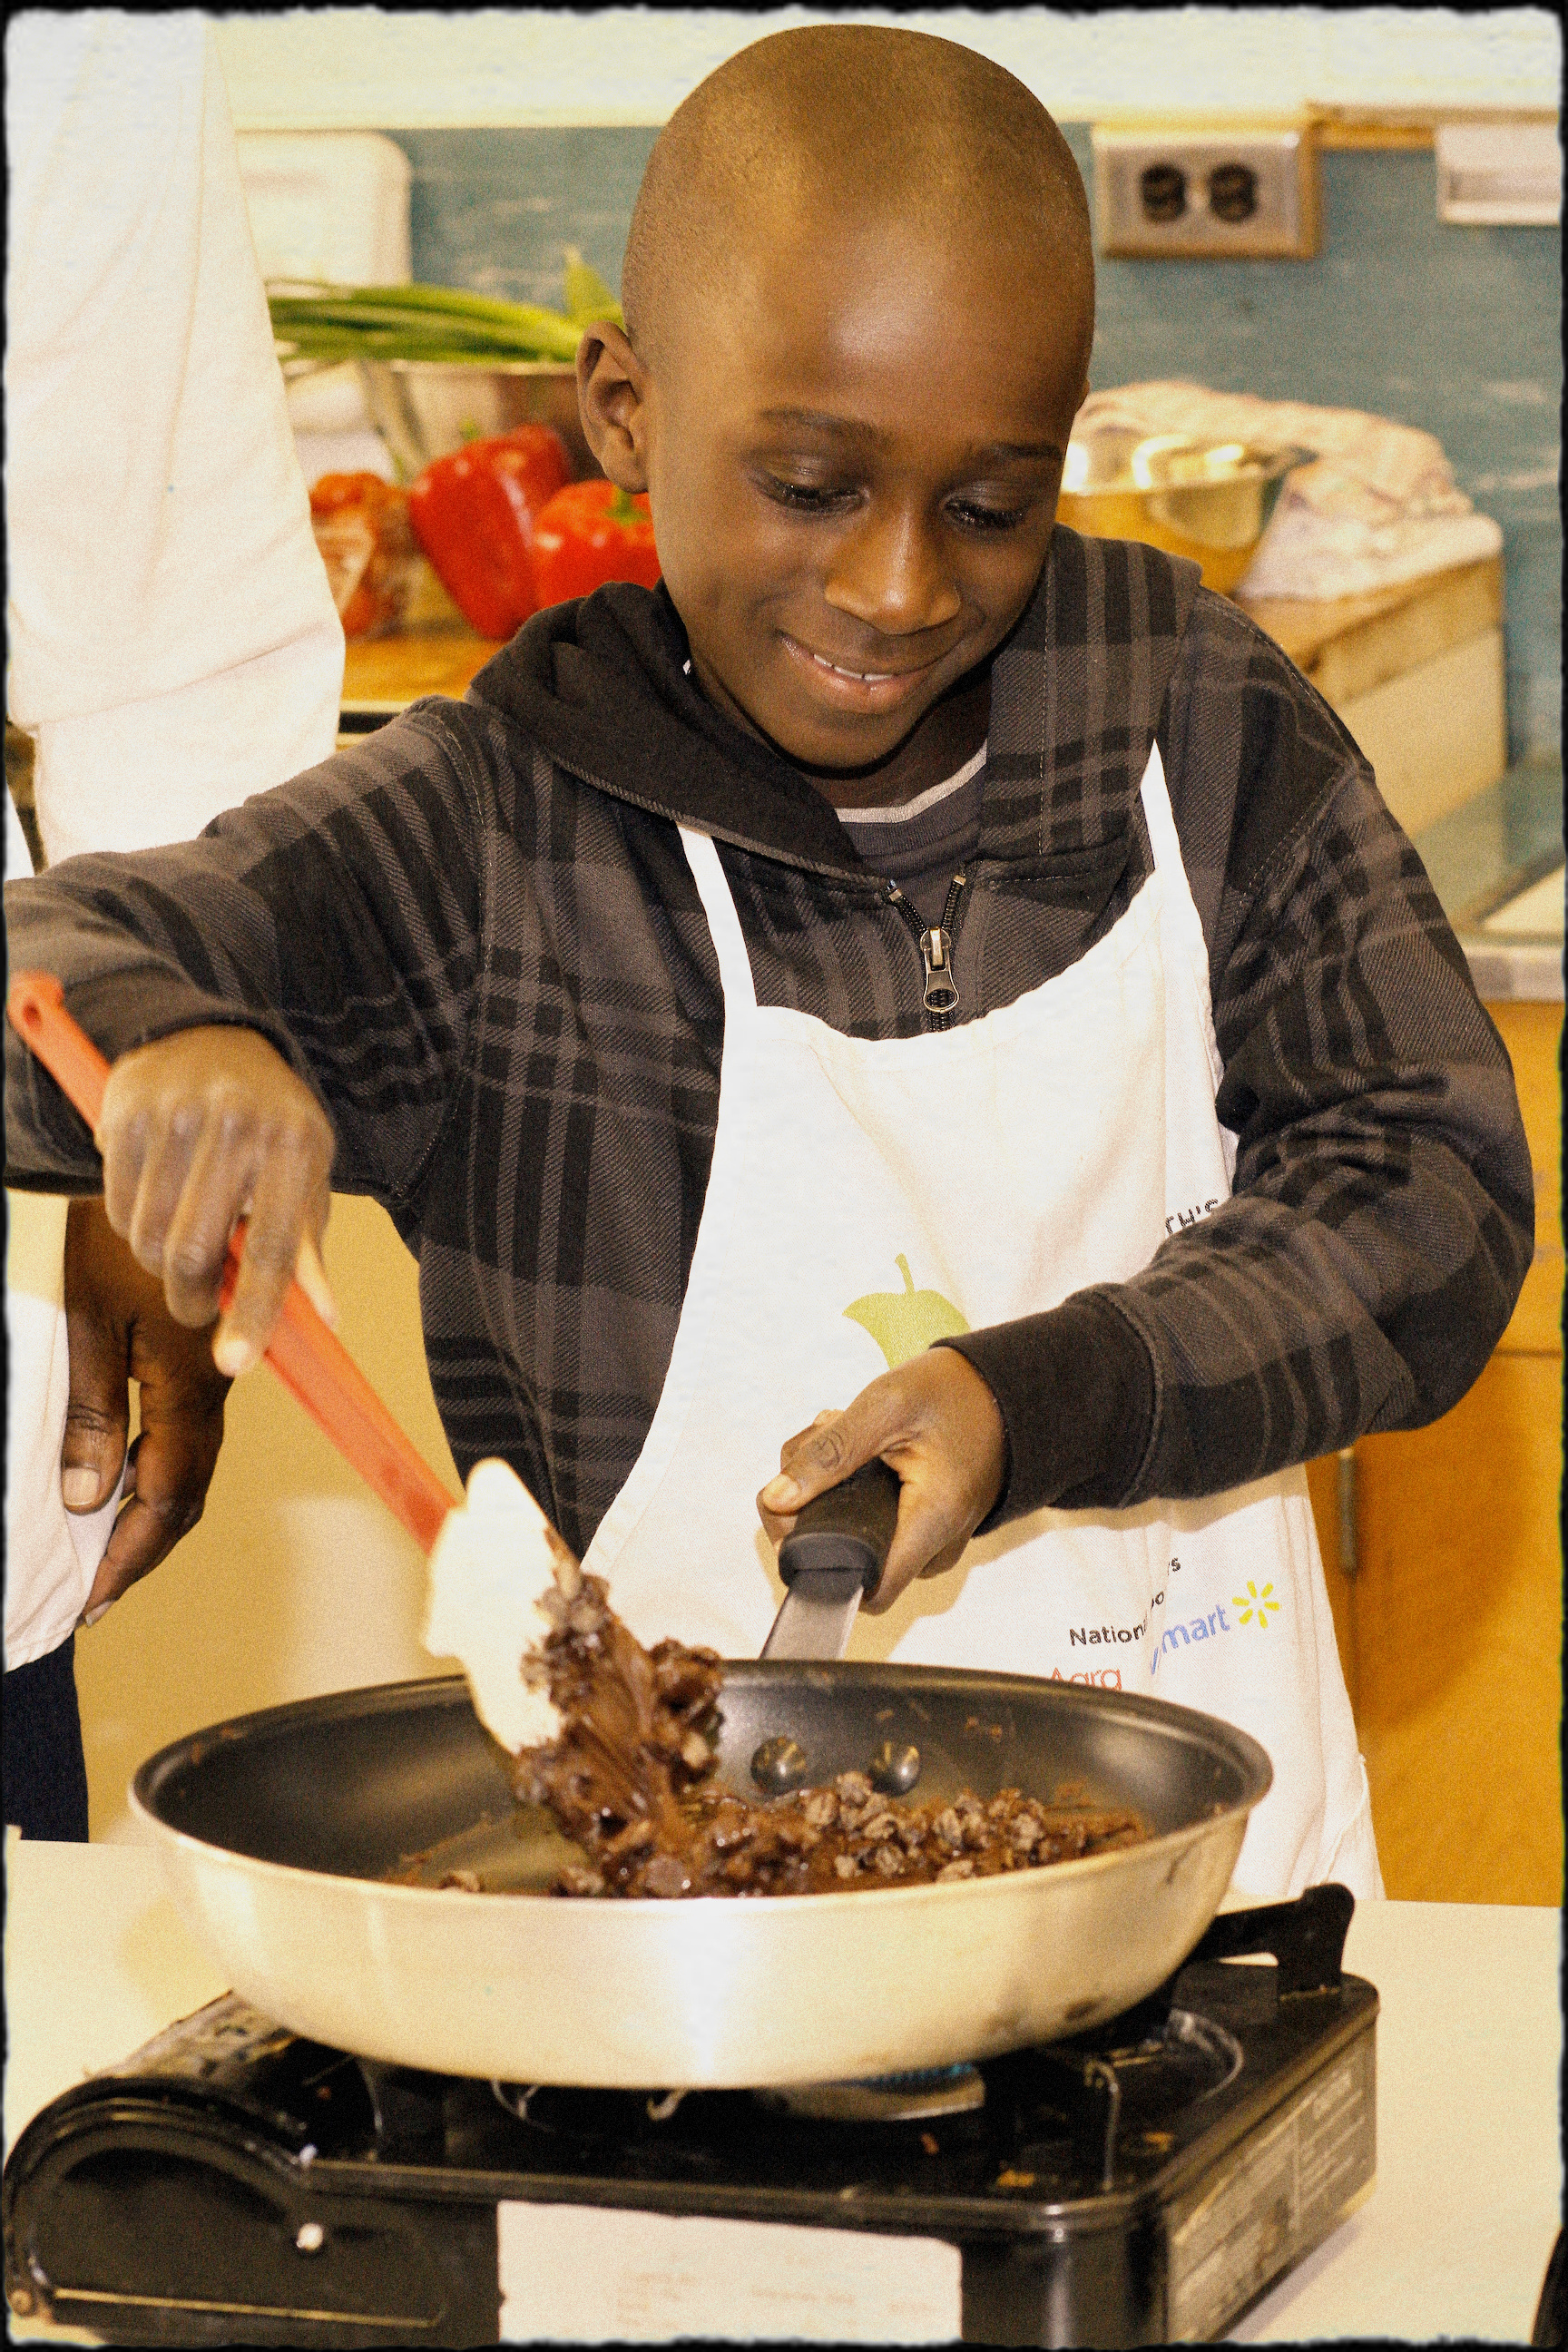 Cooking Matters builds community through hands-on nutrition education.